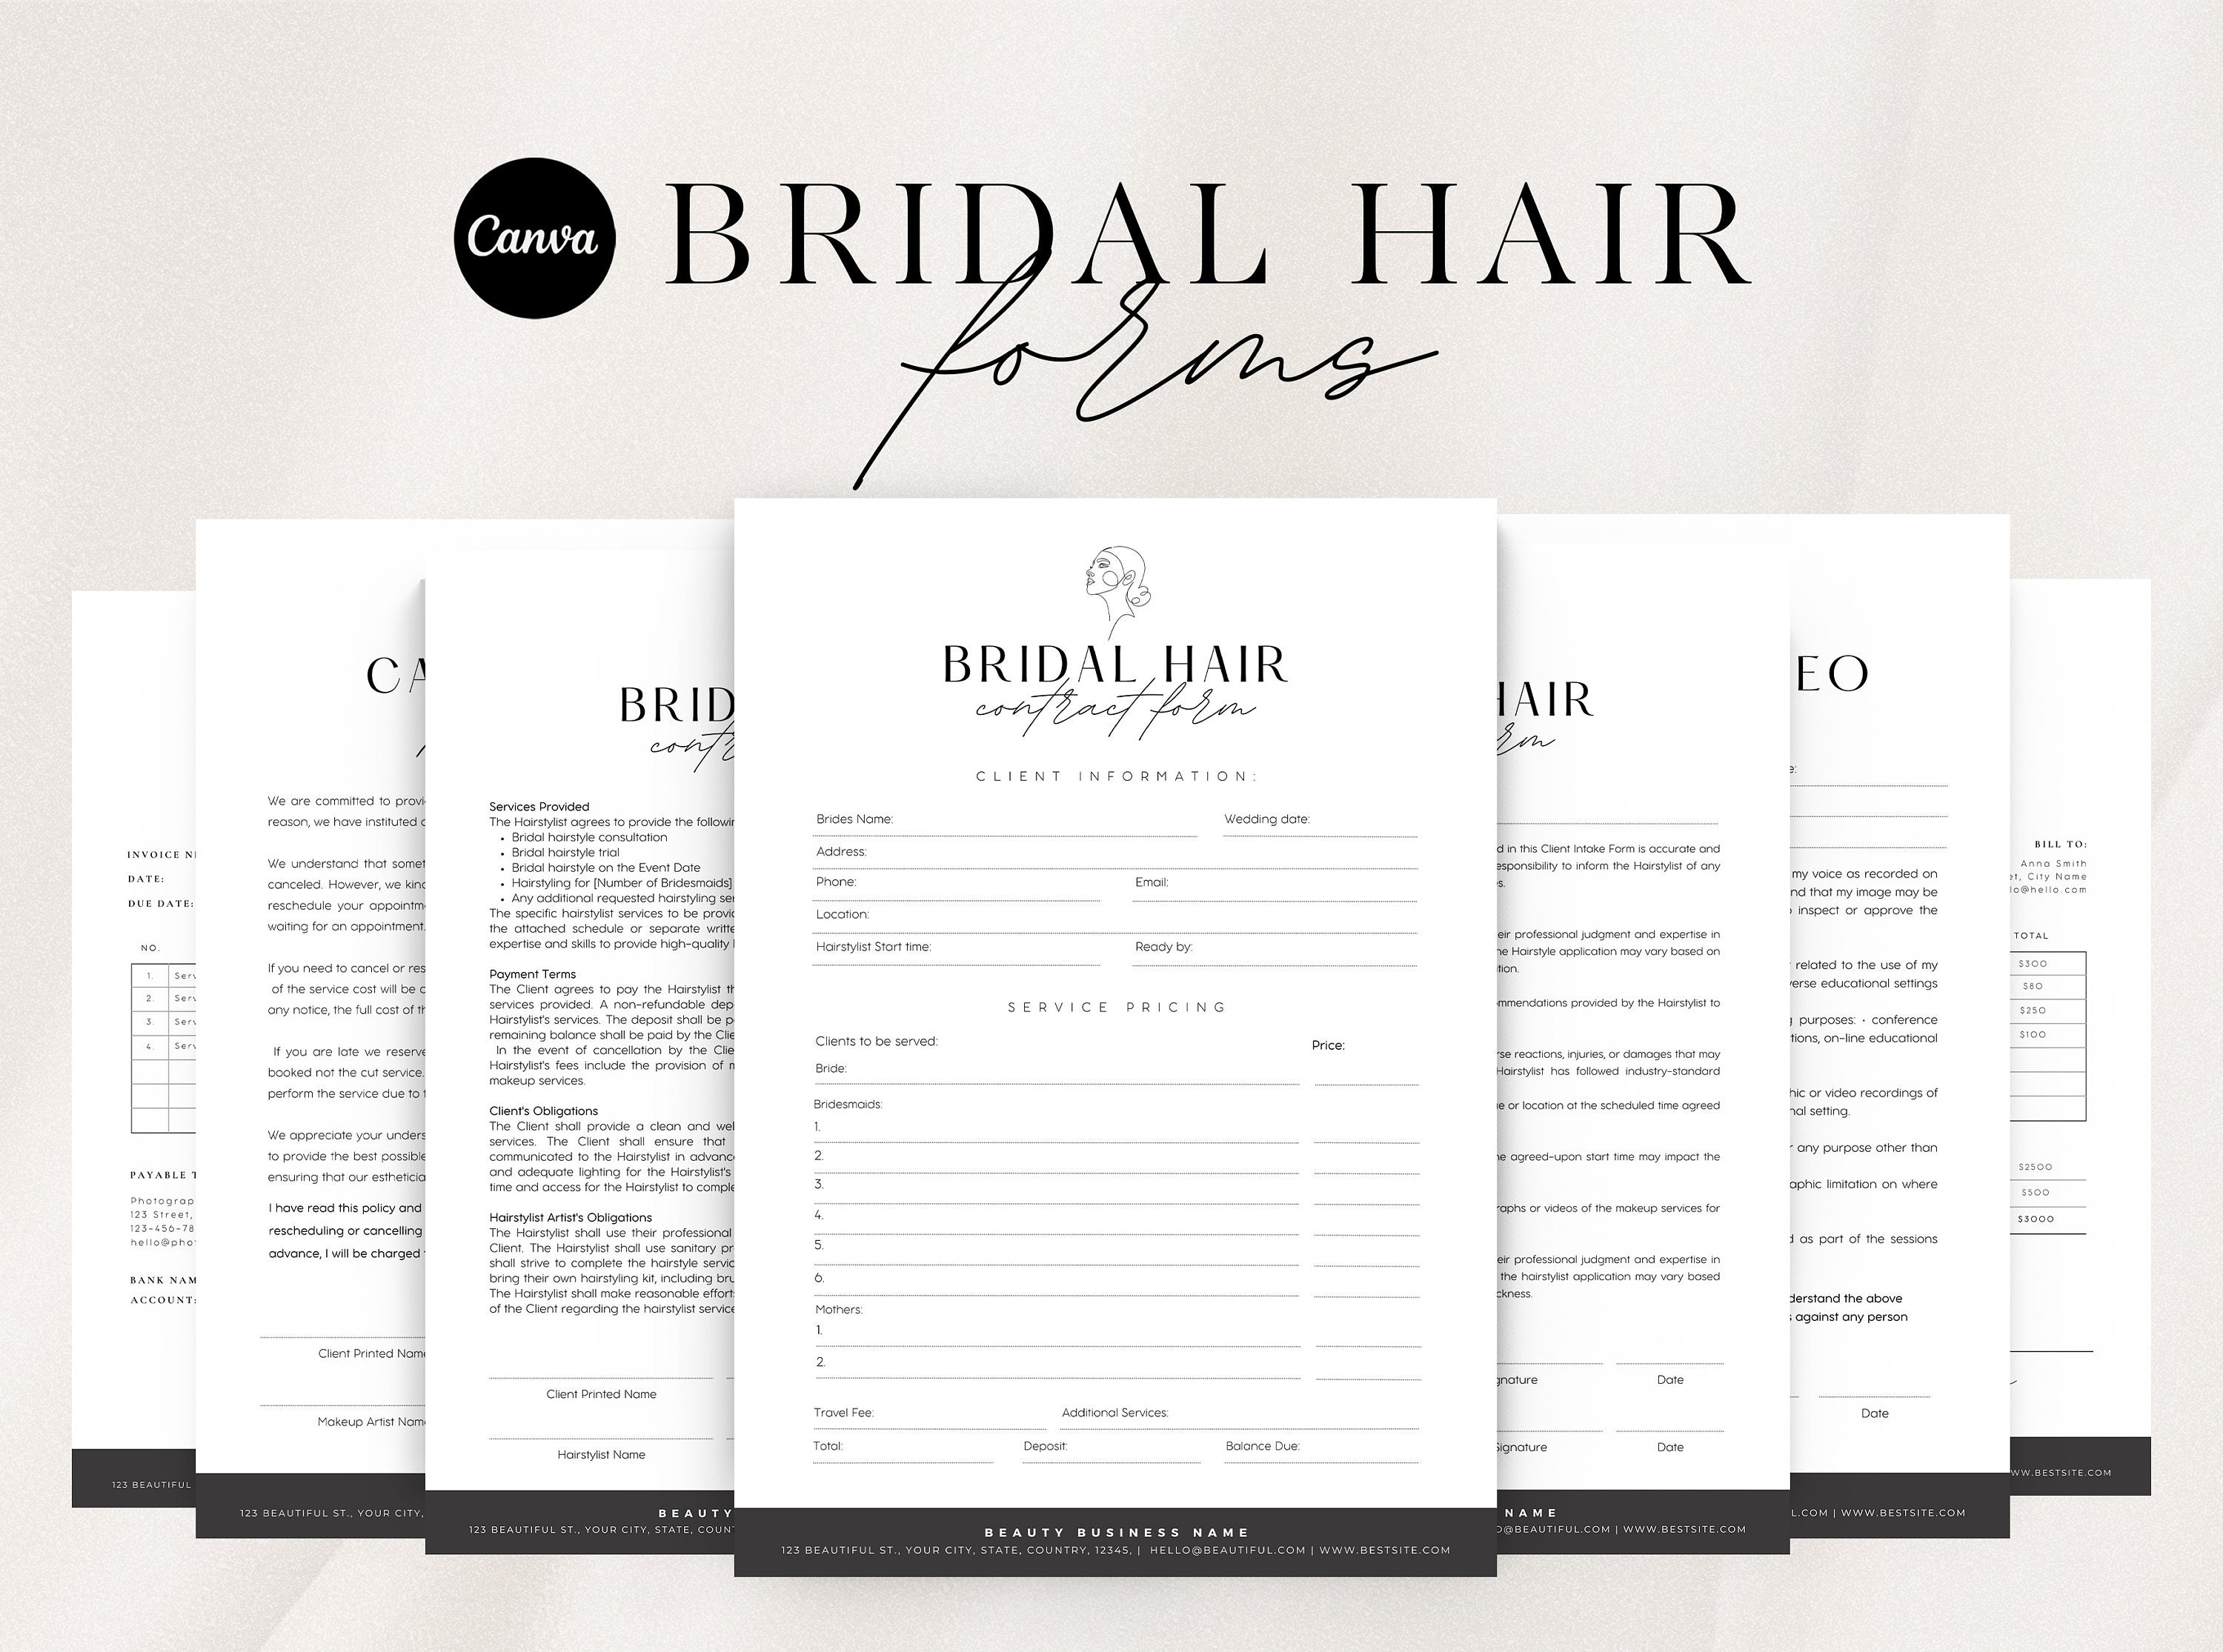 editable-bridal-hair-contract-template-bridal-hairstylist-etsy